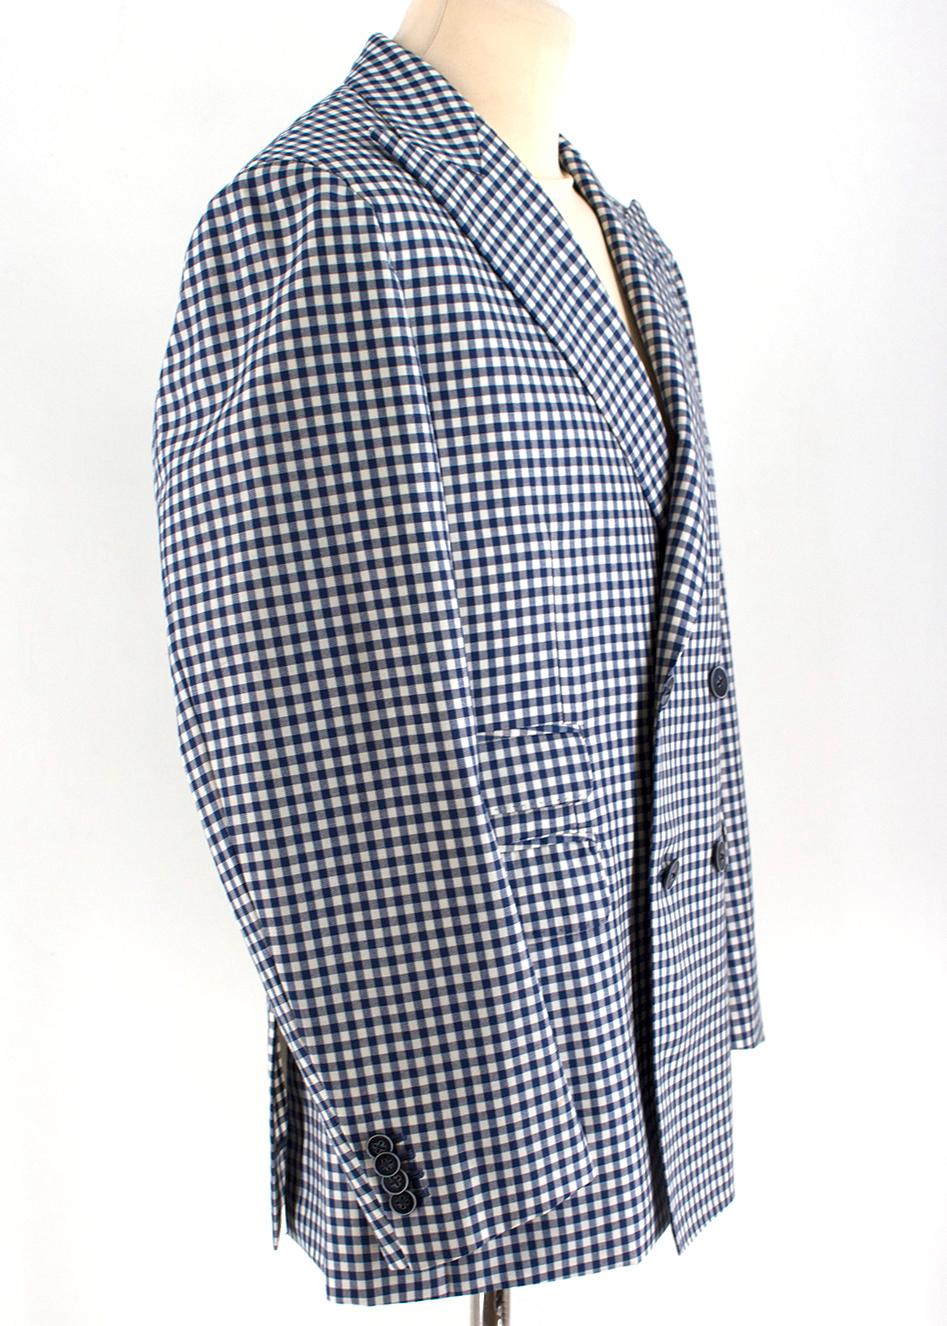 Savile Clifford Bespoke Checkered Blazer Jacket

- Navy and White Blazer Jacket
- Checkered Knit 
- Point collar, long sleeved 
- Double breasted
- Triple flap pockets, single chest slip pocket 
- Buttoned sleeves
- Partially Lined

Please note,